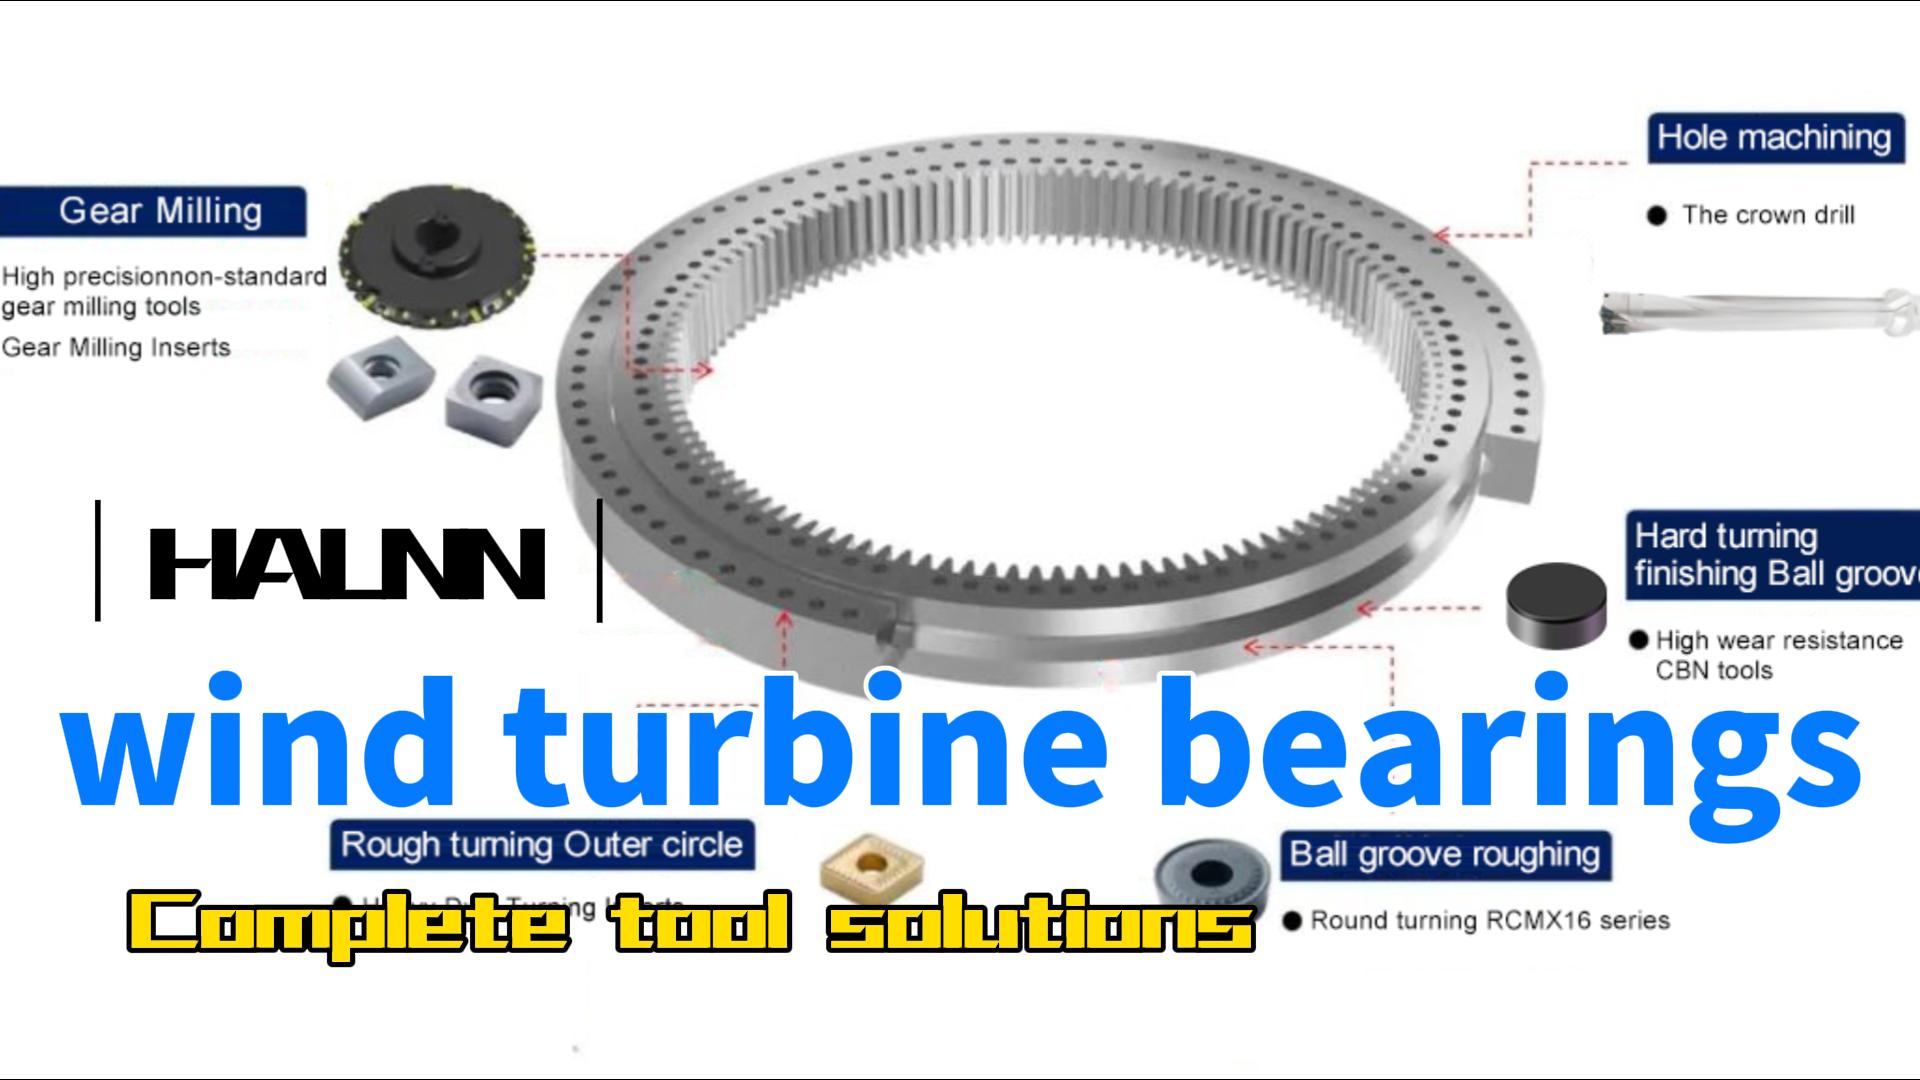 Wind turbine bearing complete CBN tools solutions